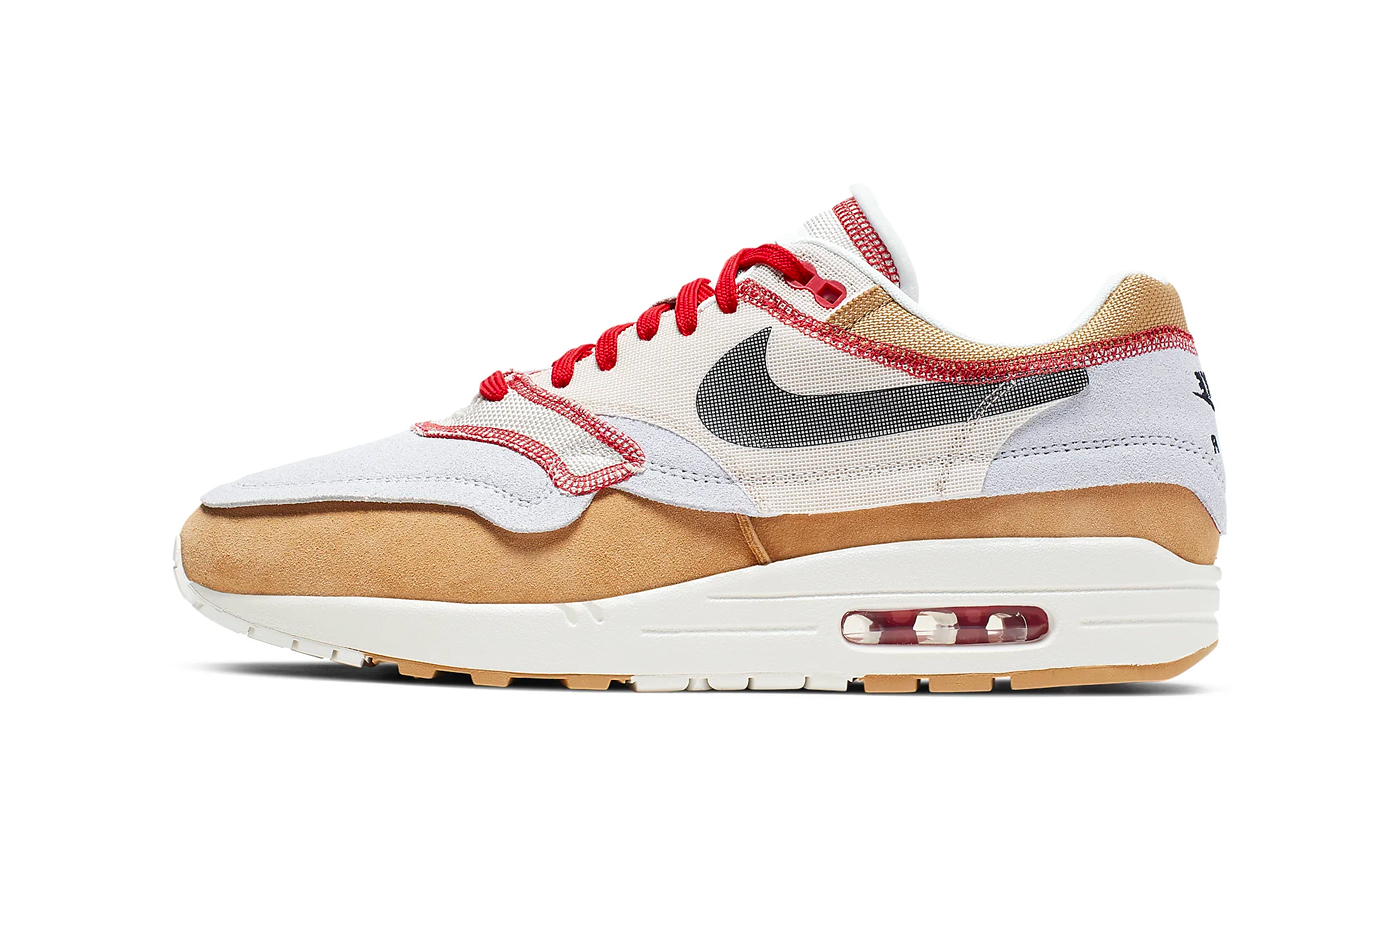 Nike Air Max 1 Premium SE Inside Out Release | HYPEBEAST DROPS